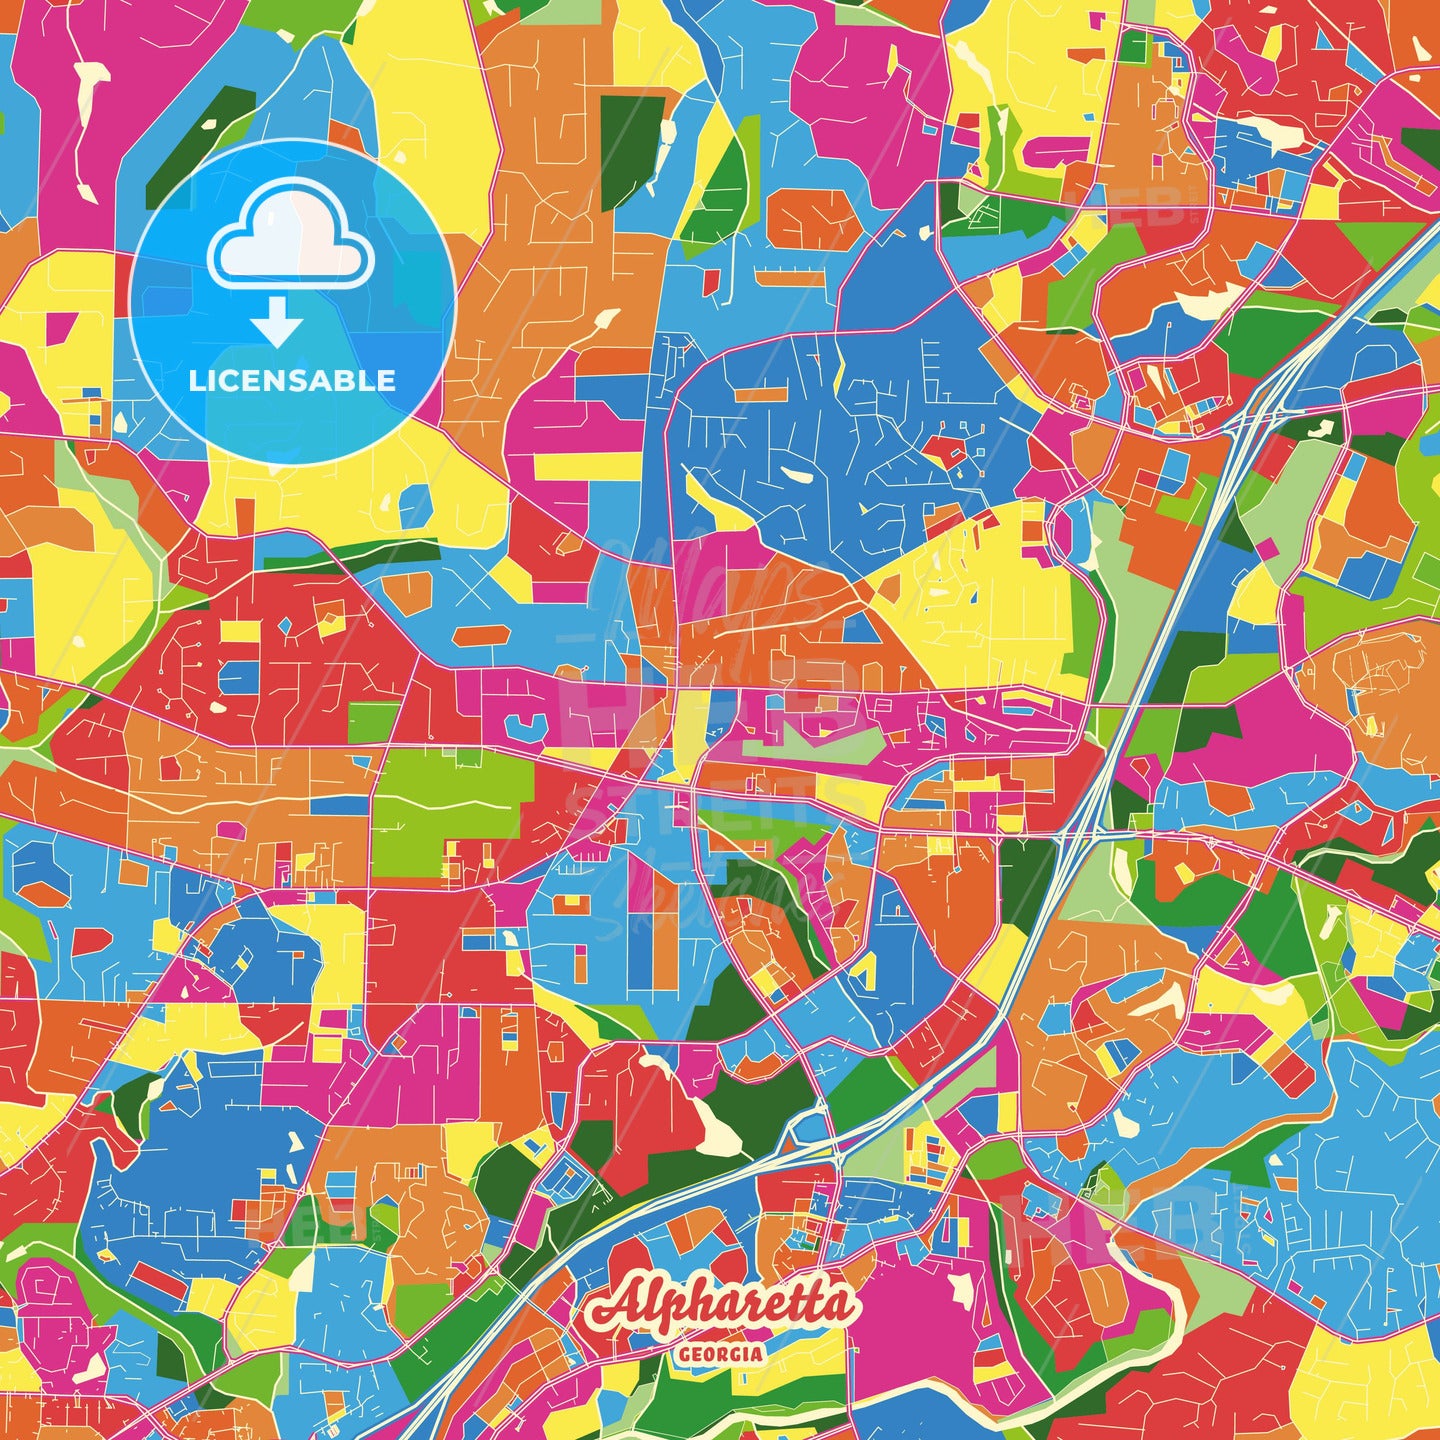 Alpharetta, United States Crazy Colorful Street Map Poster Template - HEBSTREITS Sketches